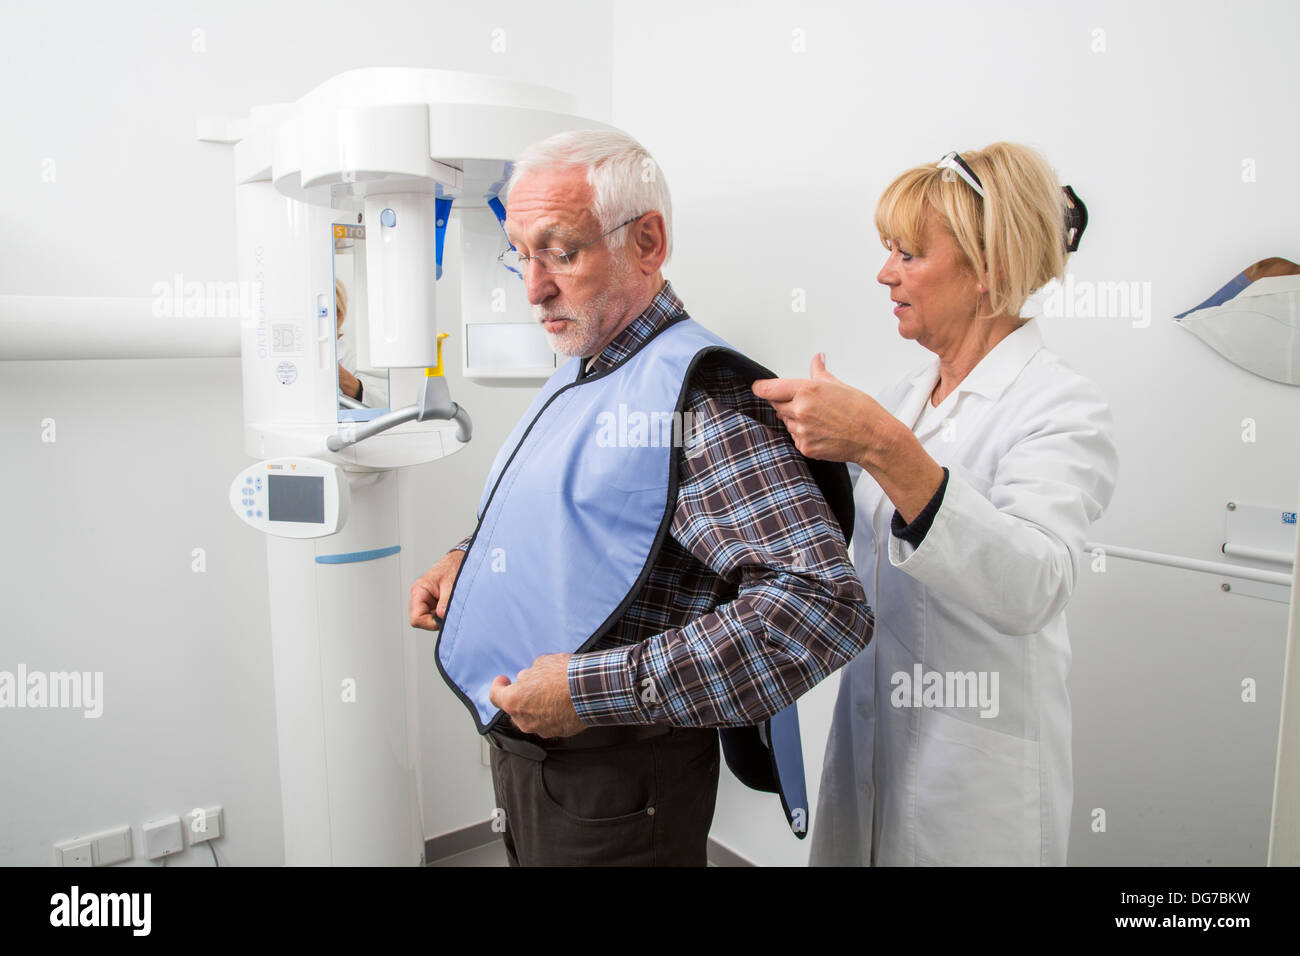 Dental practice, dentistry.Patient prepared for the X-ray of the teeth. Lead vest as radiation protection. Stock Photo